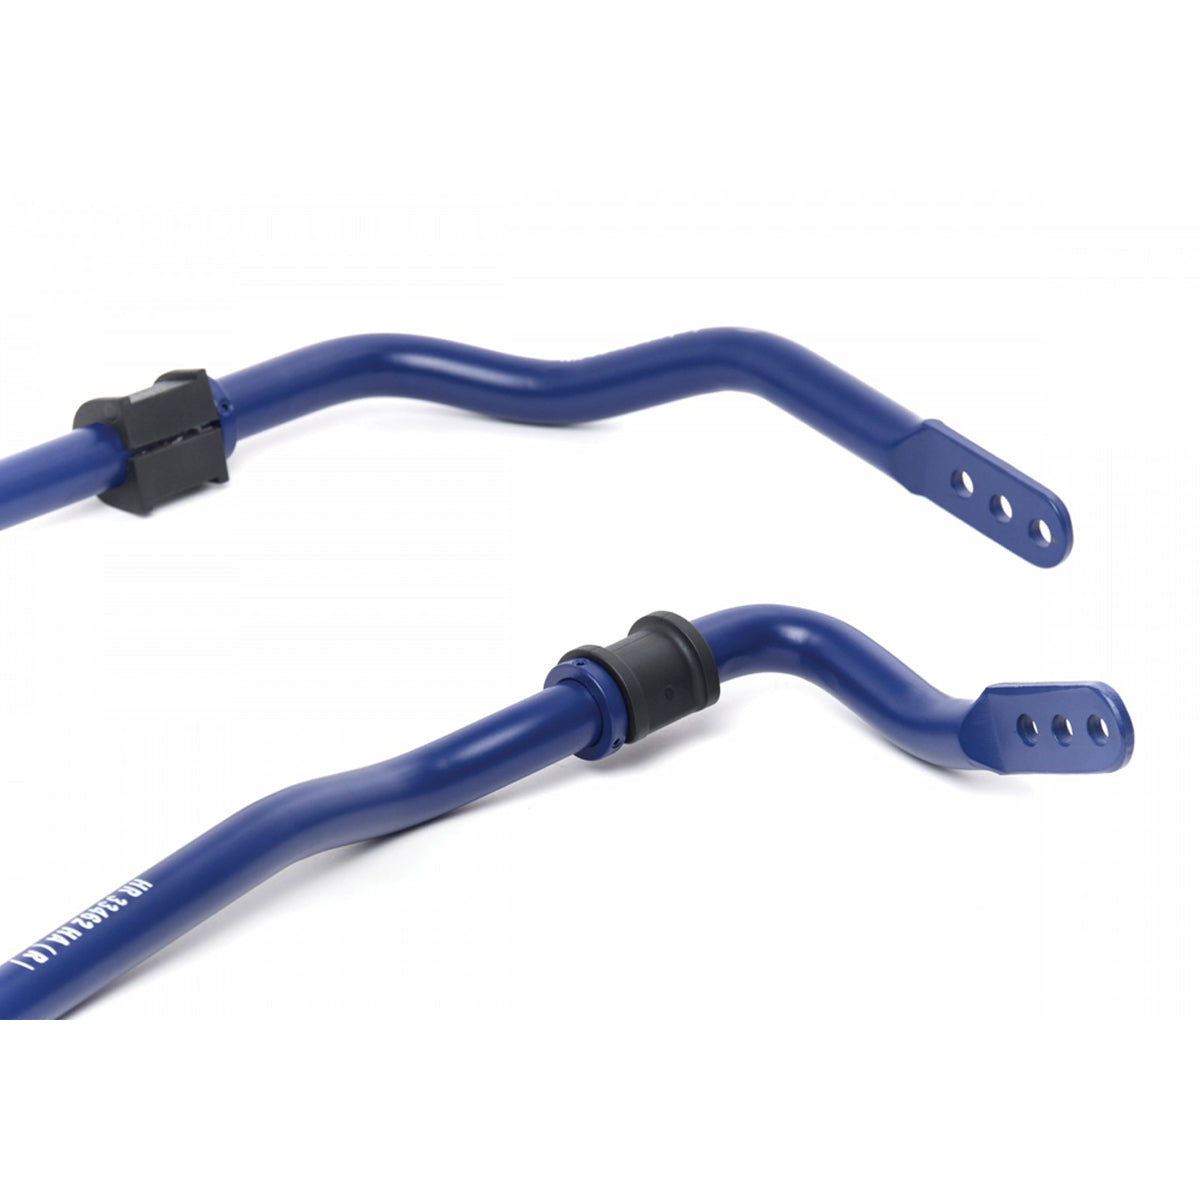 H&R Sway Bar Kit - Adjustable 28mm & 21mm: E36 Non-M